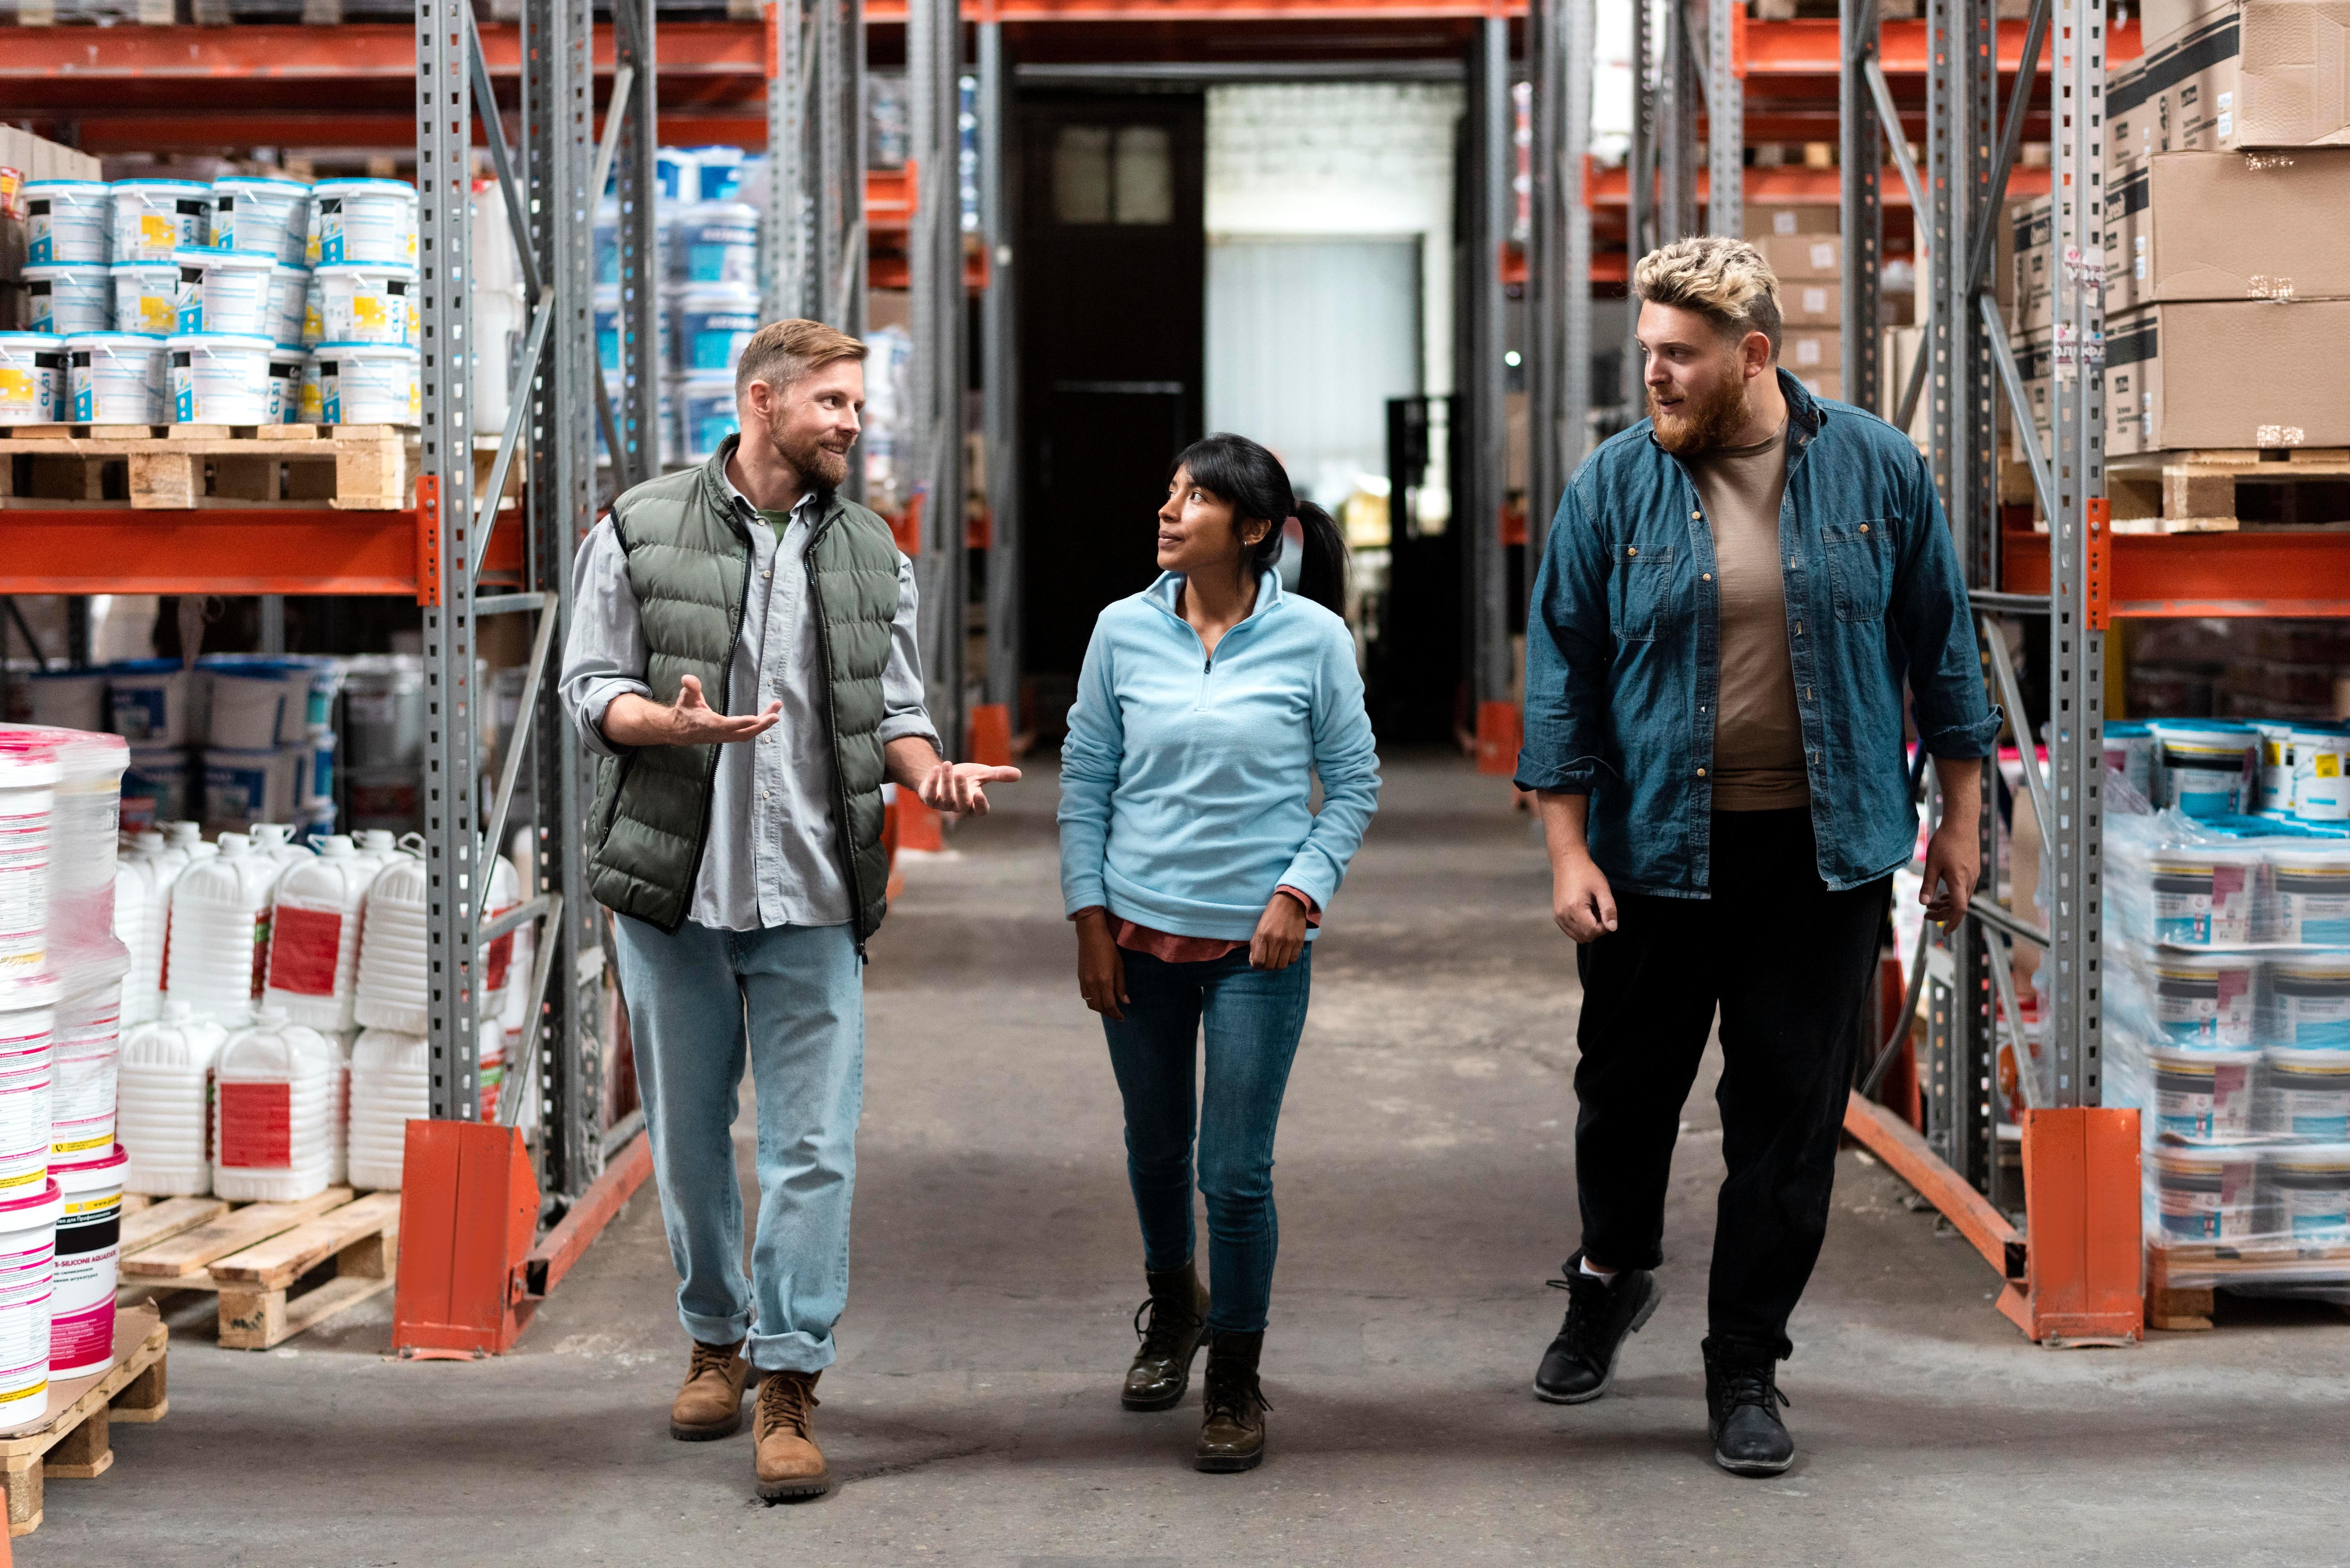 Two men and a woman conversing while walking in a warehouse